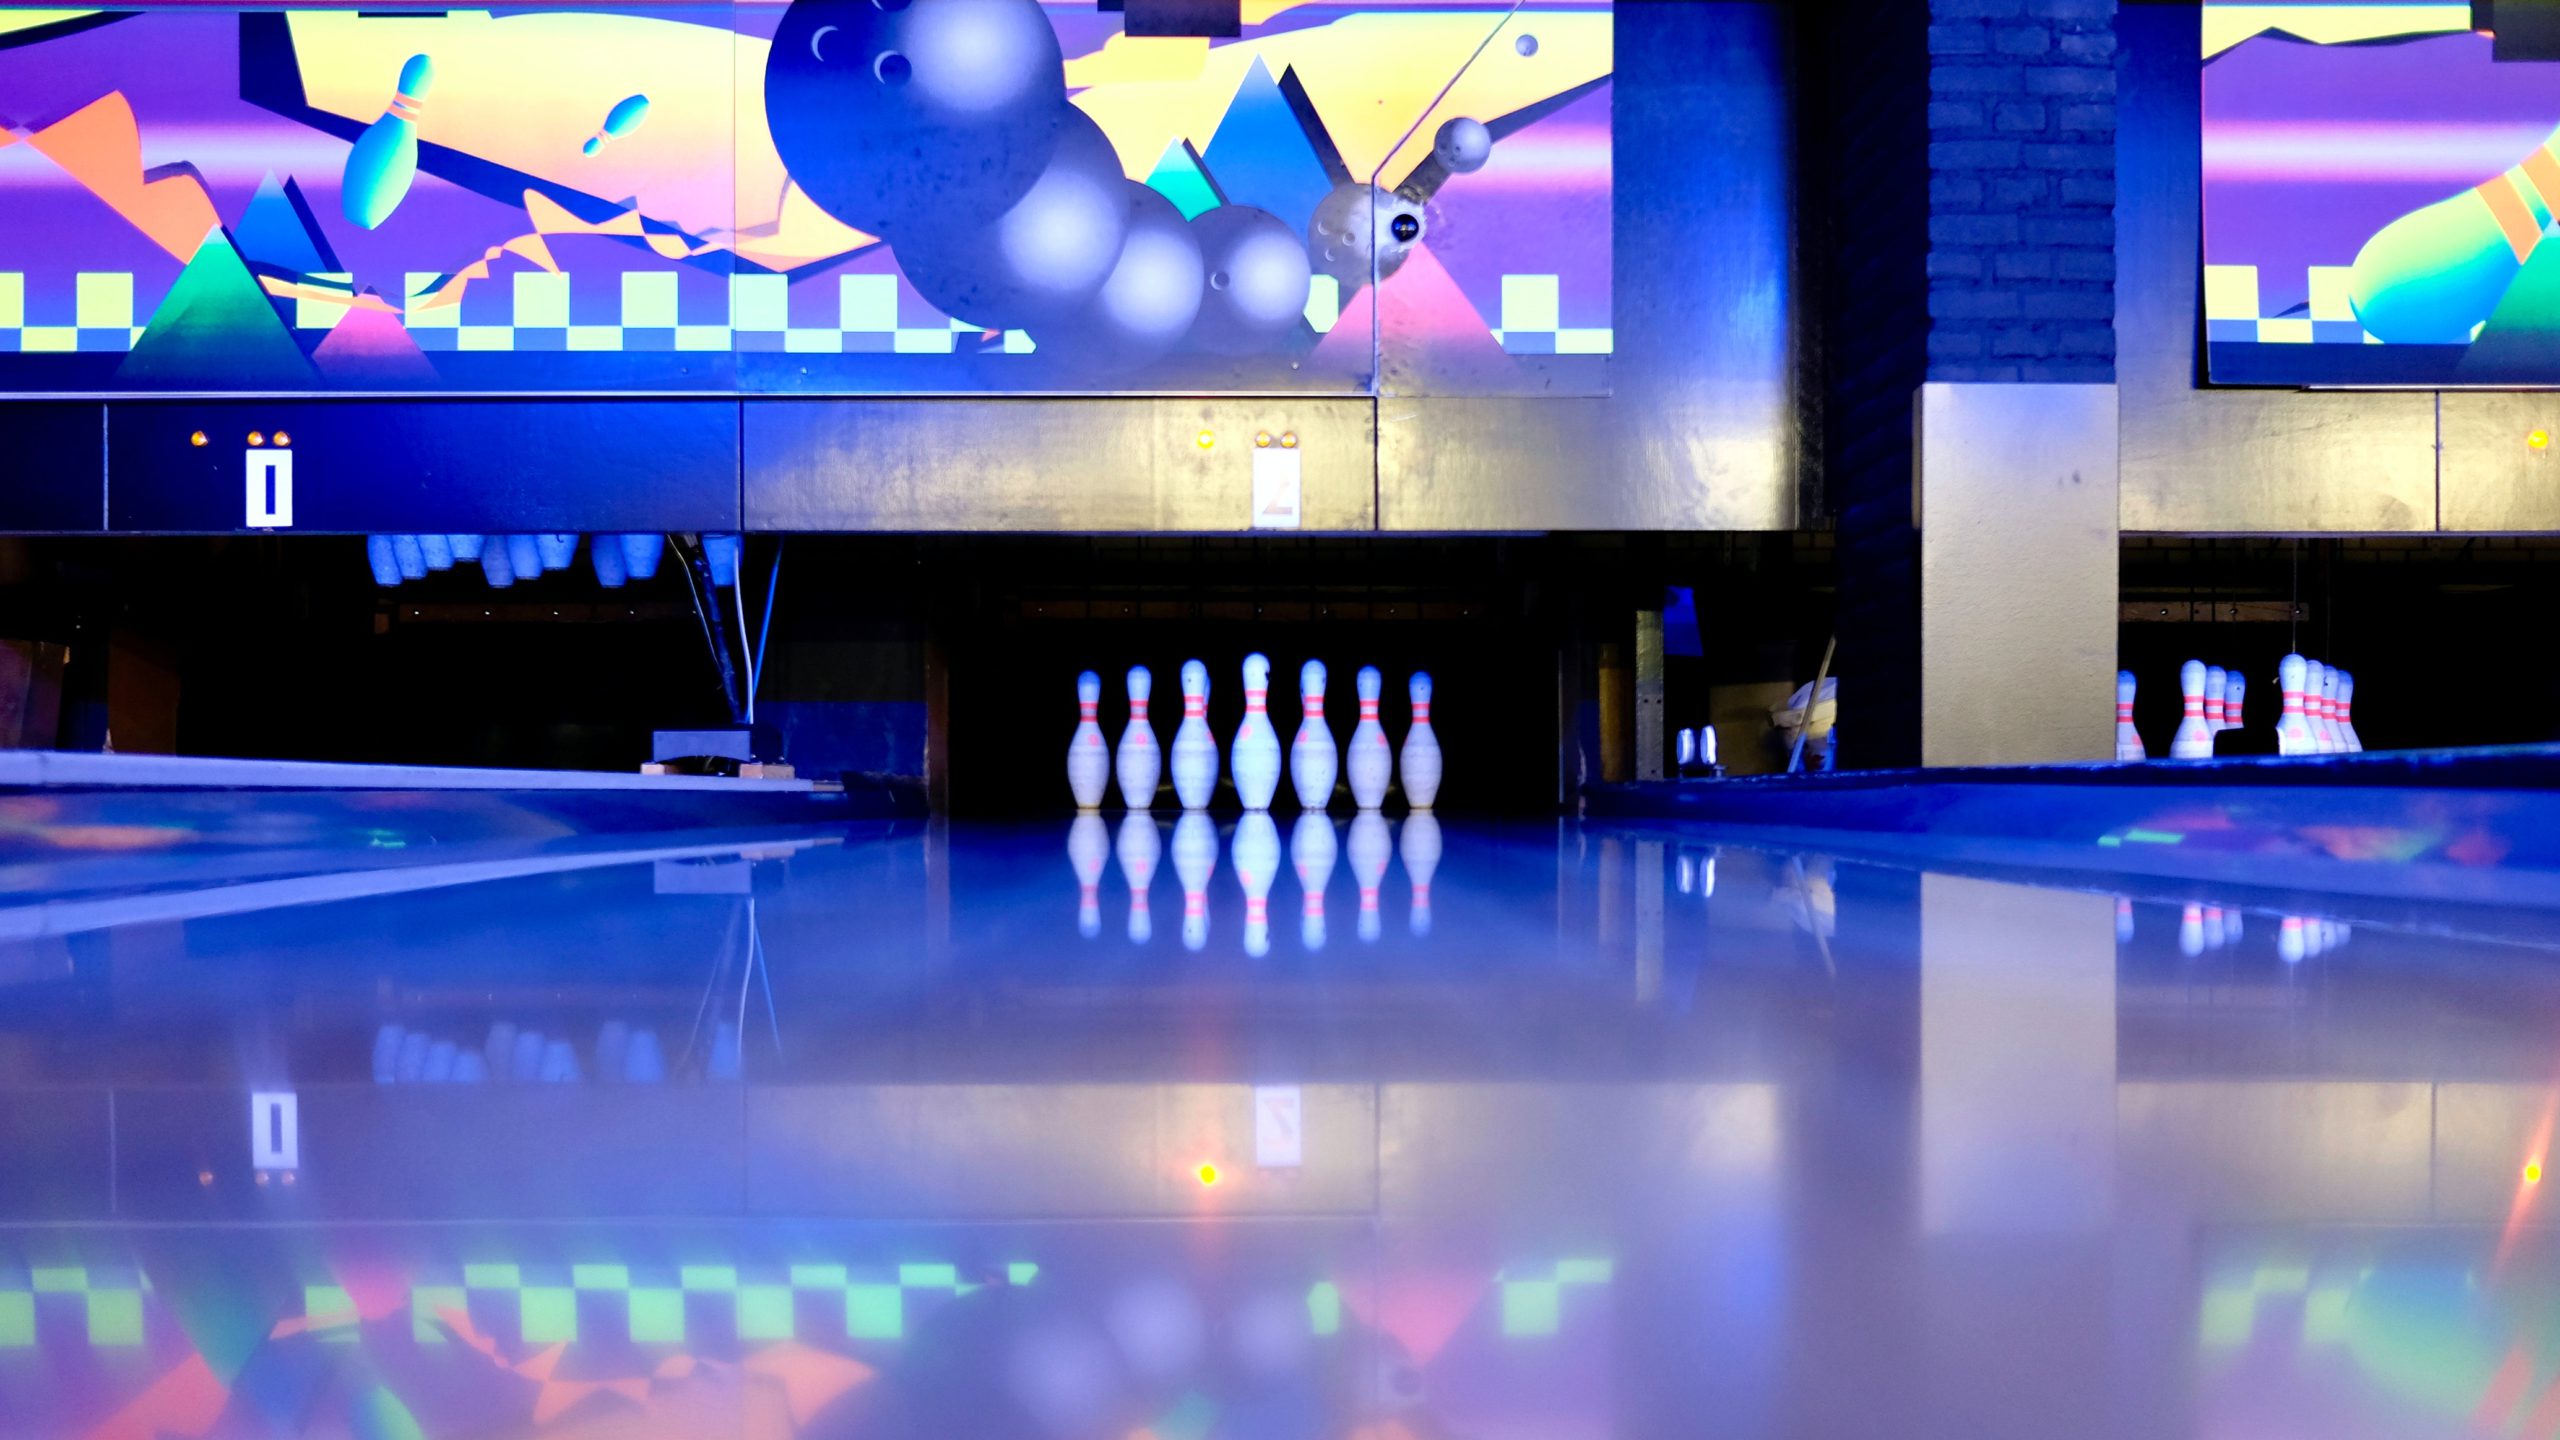 Bowling lane with neon lights and all pins up